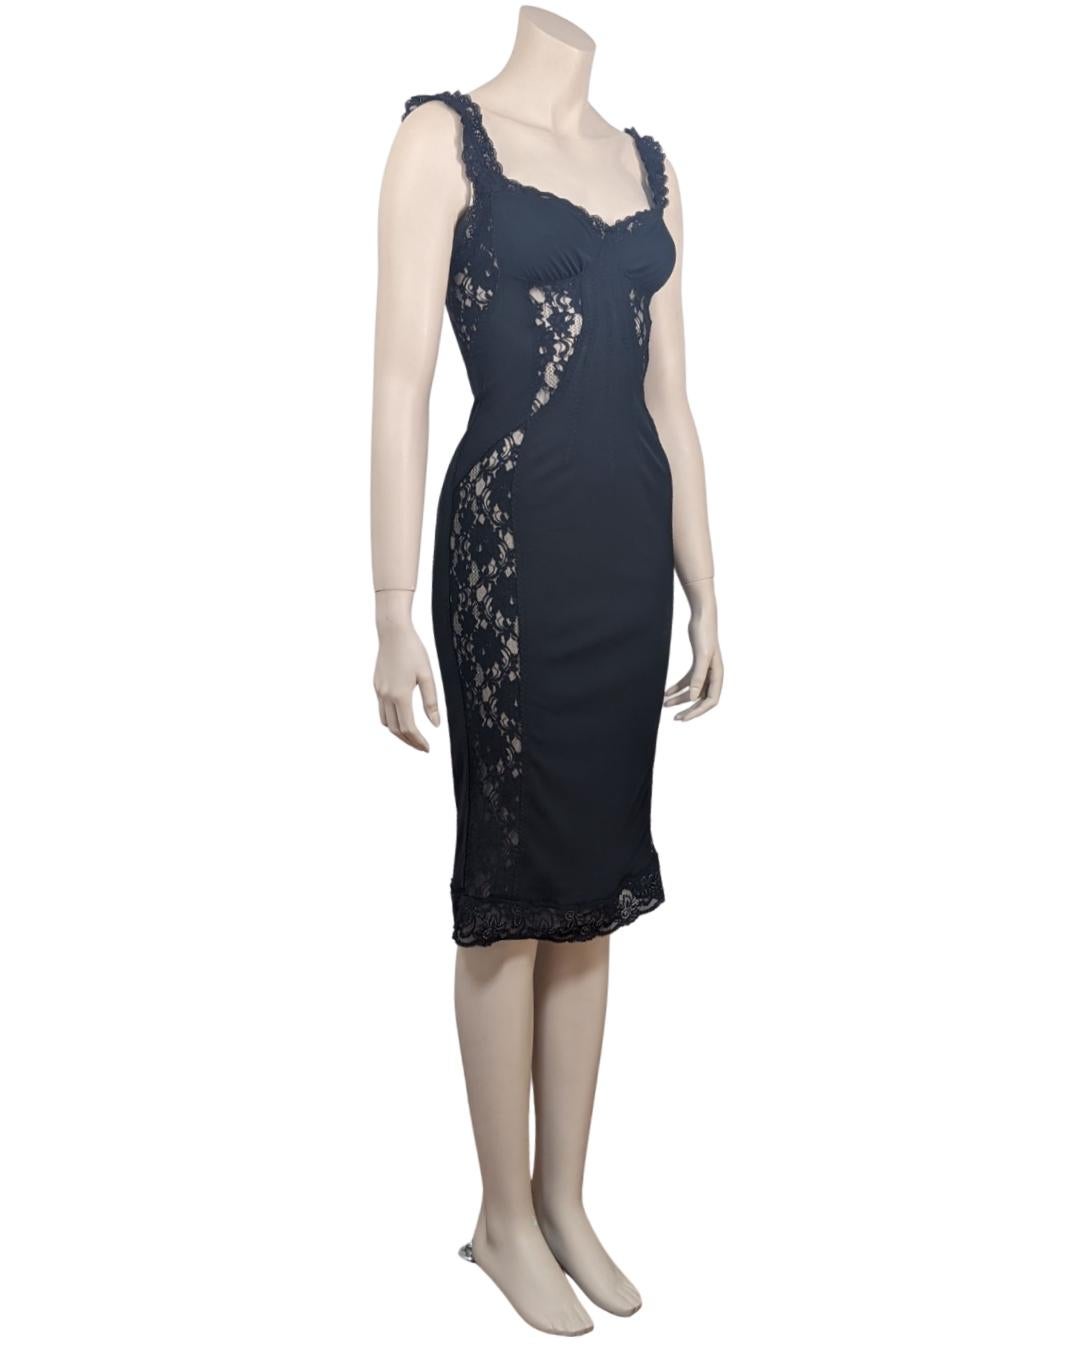 D&G by Dolce & Gabbana Fall Winter 2003 Laces Insert Midi Dress For Sale 5